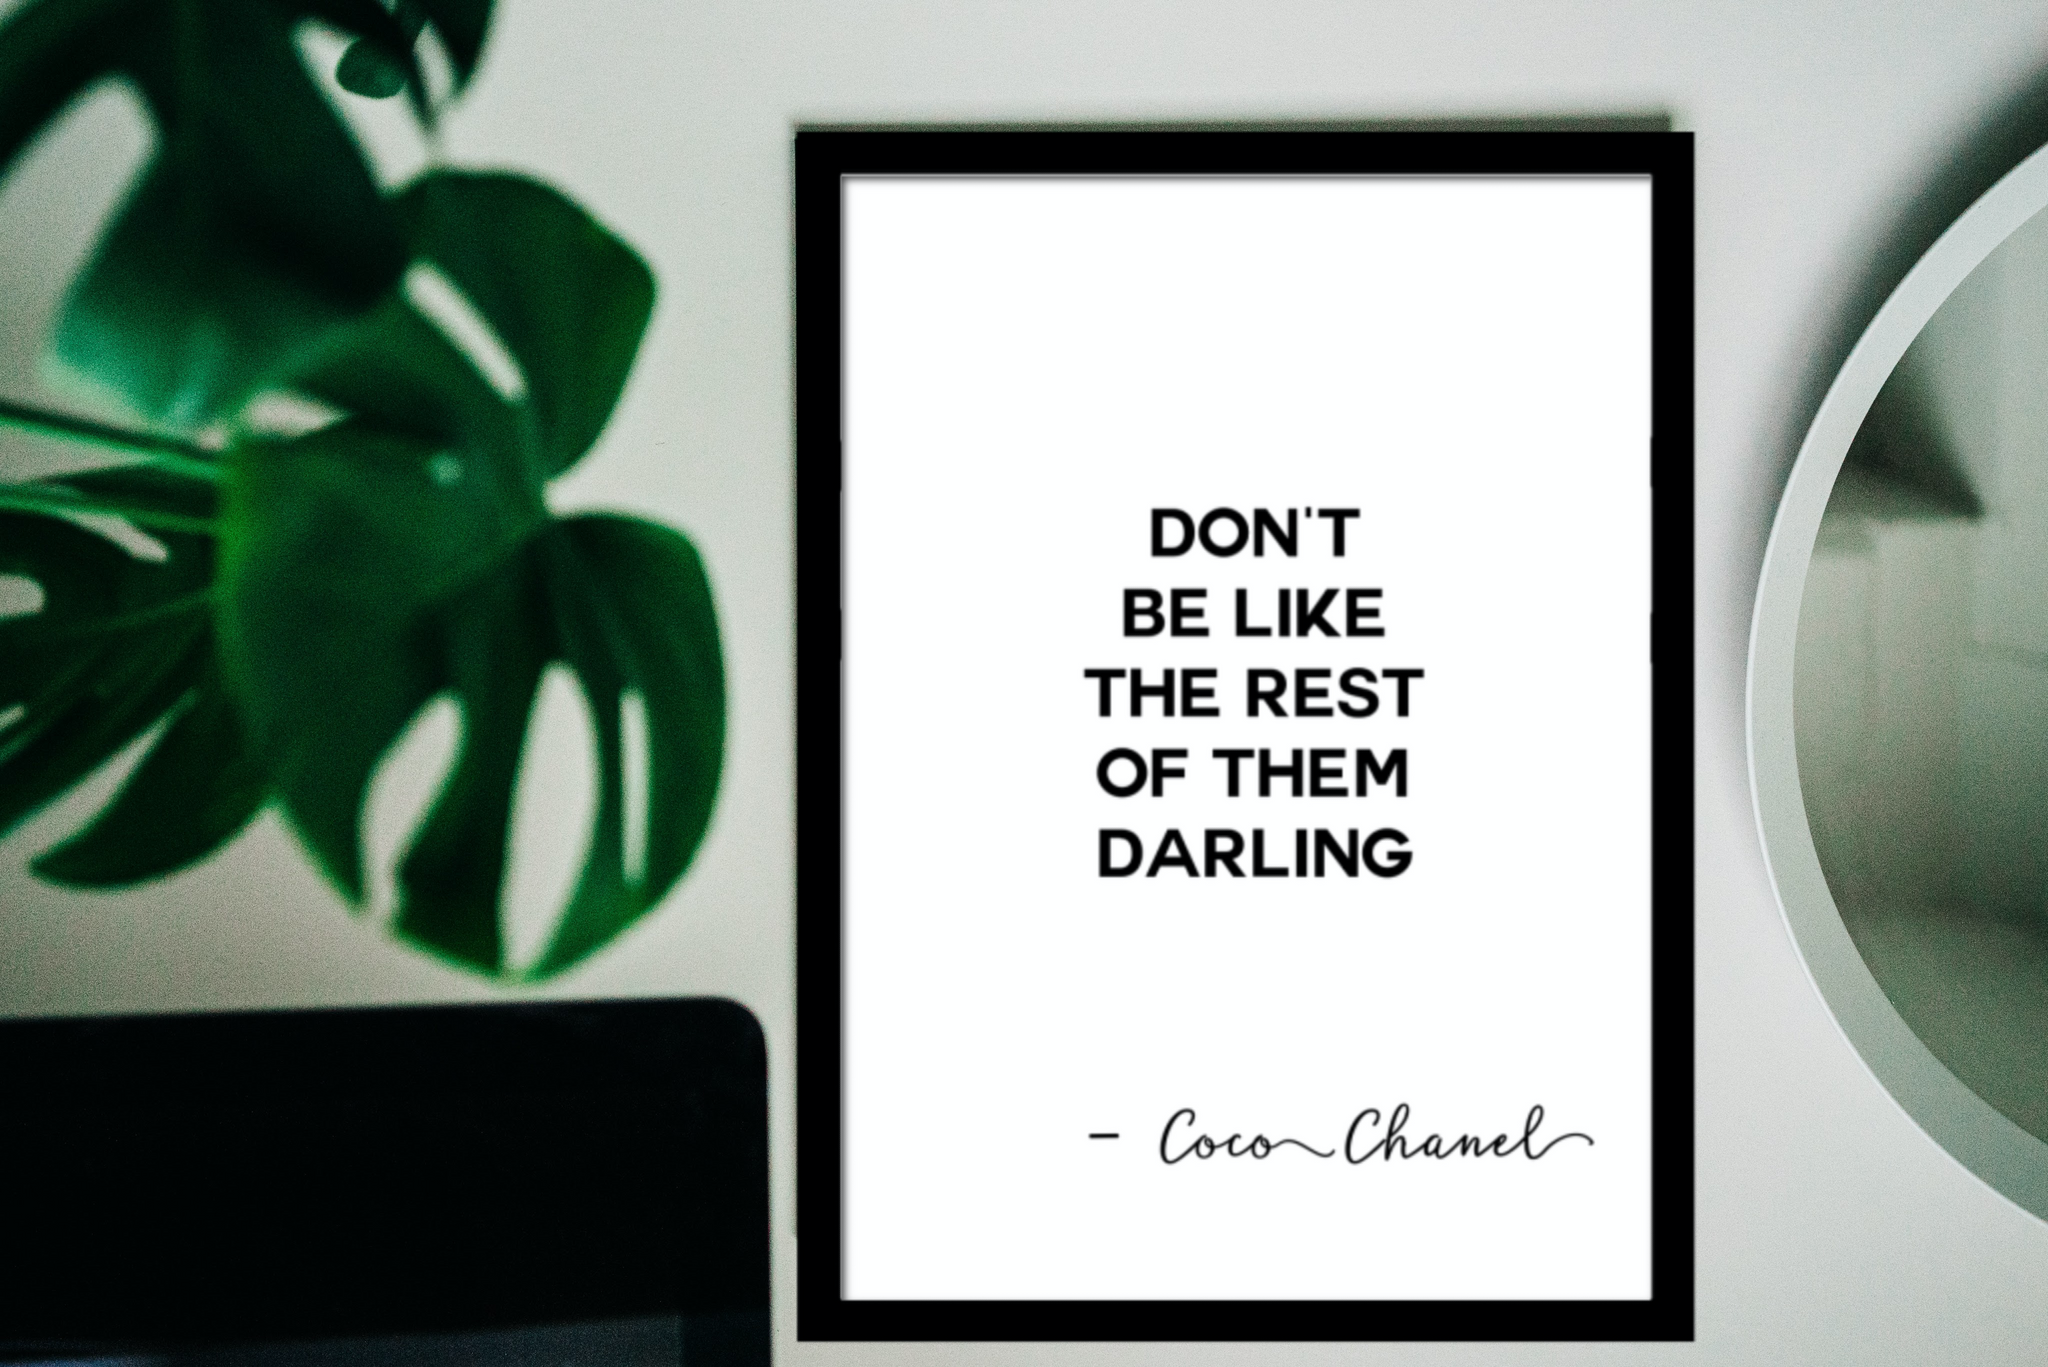 Fashion & Beauty: Don't be like the rest of them darling - Coco Chanel –  edgeandedge